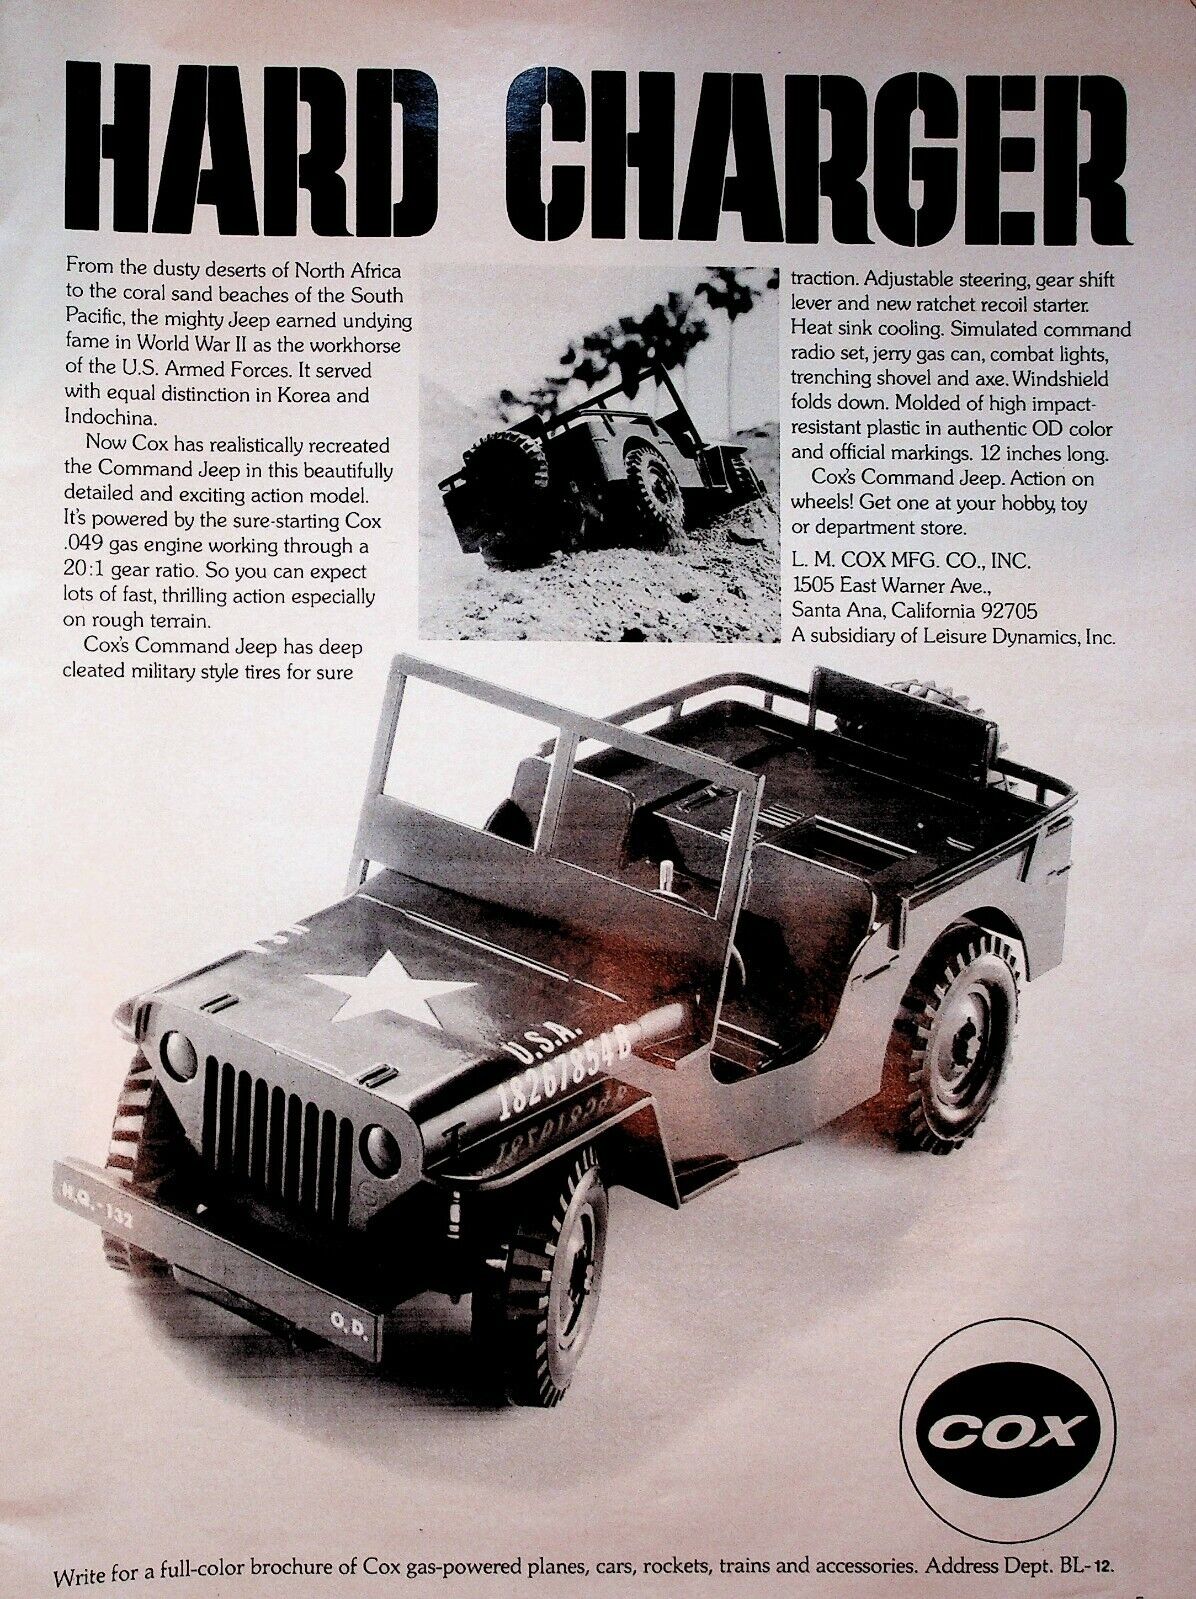 1973 Cox Army Command Jeep Military Toy - Vintage Advertisement